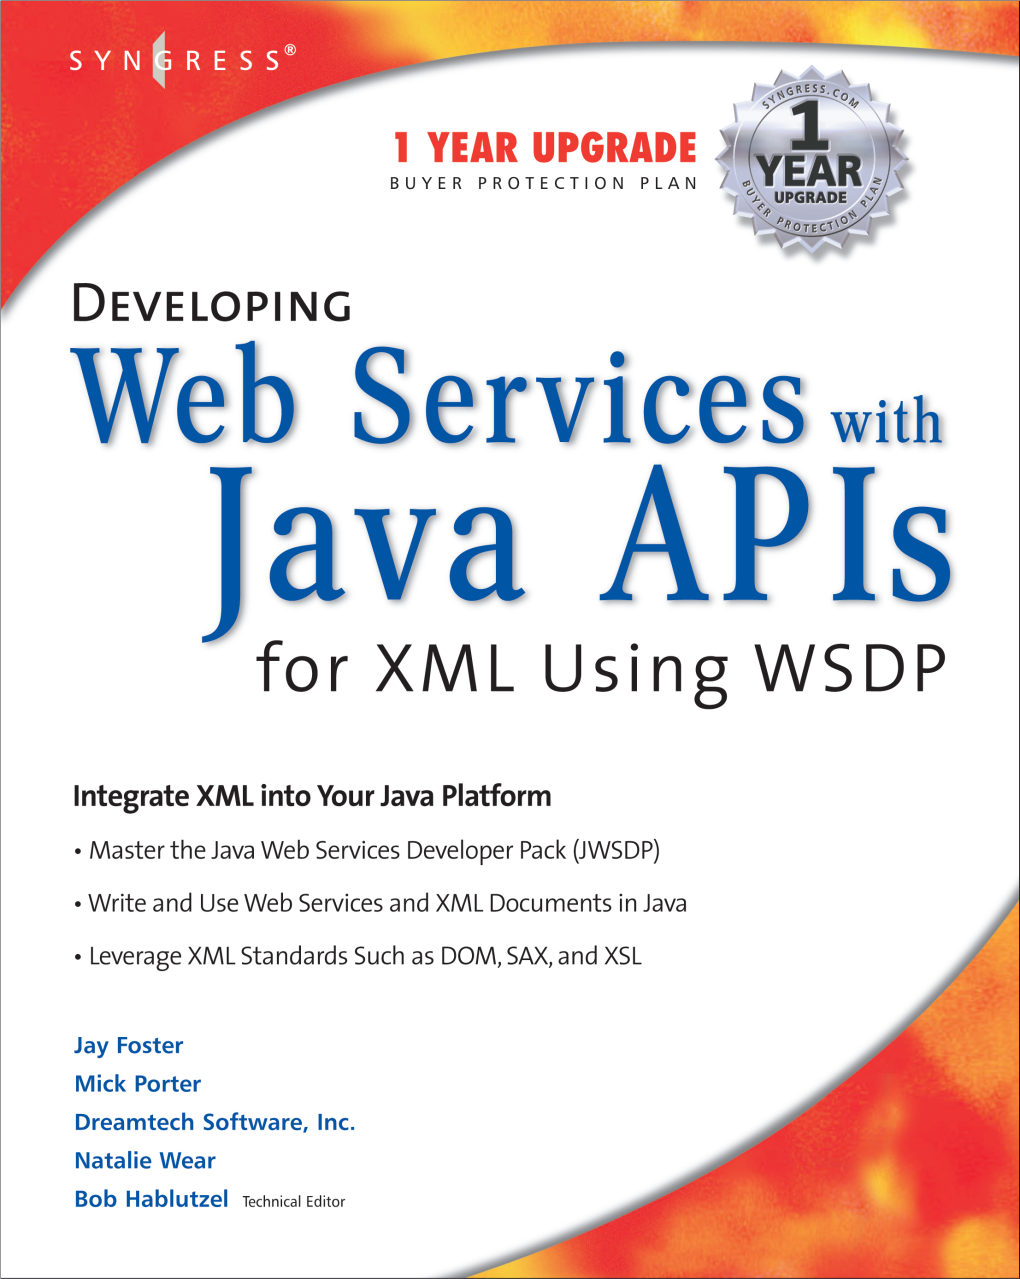 Developing Web Services with Java Apis for XML Using WSDP.Pdf